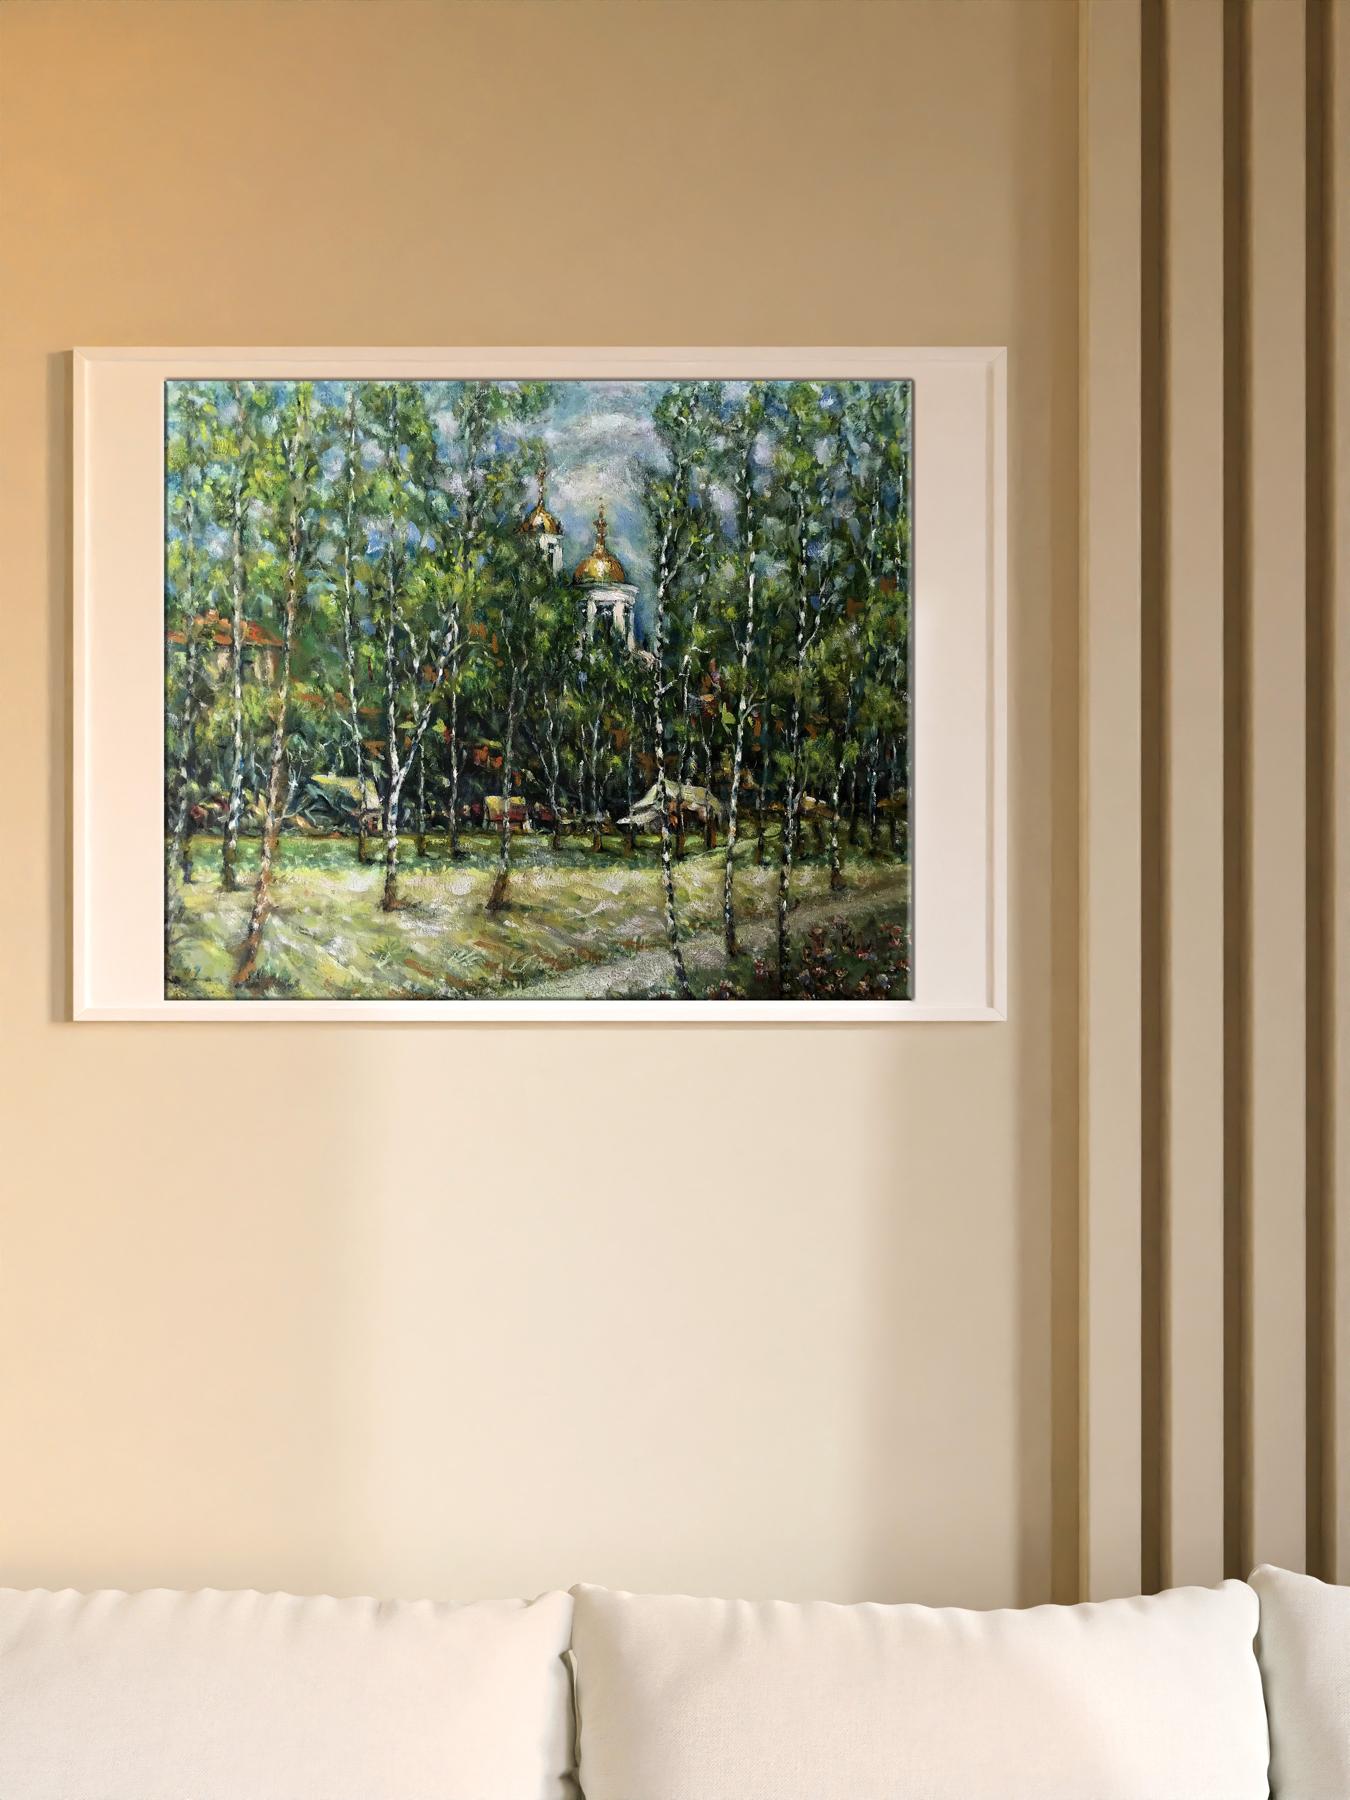 Sumy's birches are the focus of Ivan Leontyevich Shapoval's oil painting